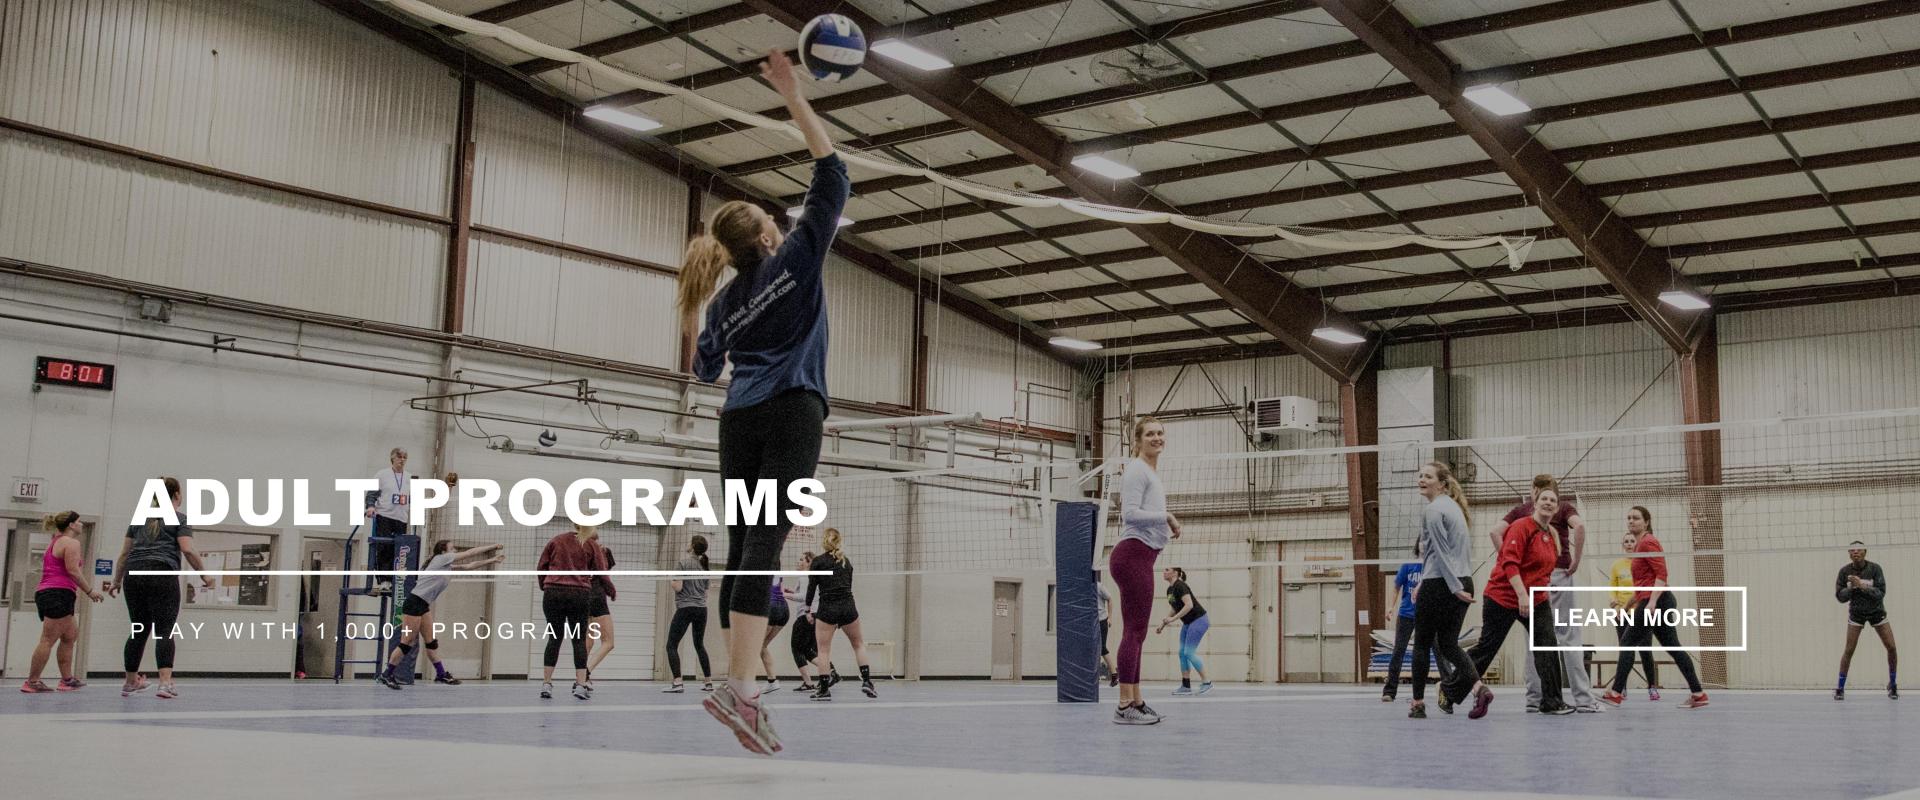 A female serving a volleyball to a team in a large building - ADULT PROGRAMS - LEARN MORE